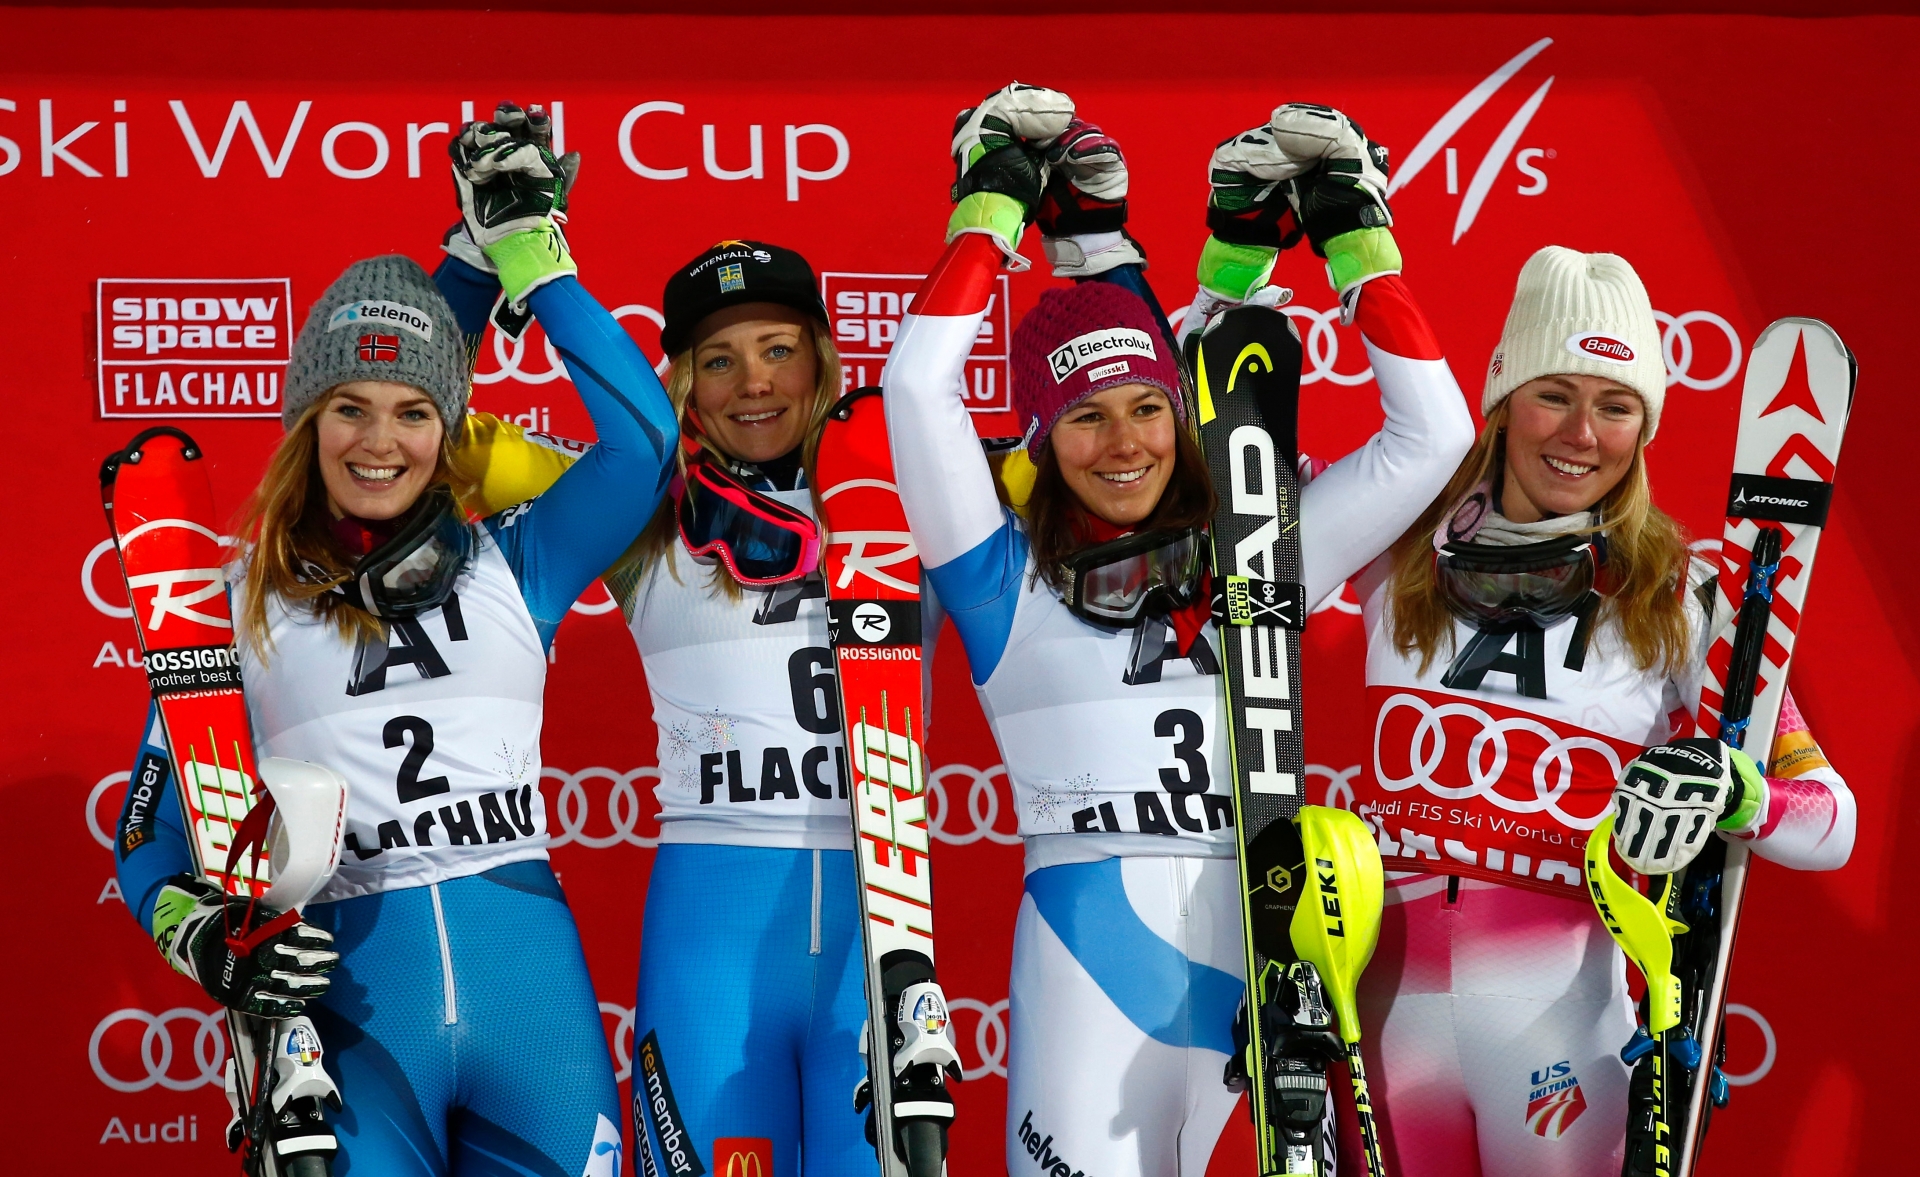 Sweden's Frida Hansdotter, second from left, winner of an alpine ski, women's World Cup slalom, celebrates on the podium with second-placed Norway's Nina Loeseth, left, and shared third-placed Switzerland's Wendy Holdener, and United States's Mikaela Shiffrin, right, in Flachau, Austria, Tuesday, Jan. 10, 2017. (AP Photo/Giovanni Auletta) Austria Alpine Skiing World Cup